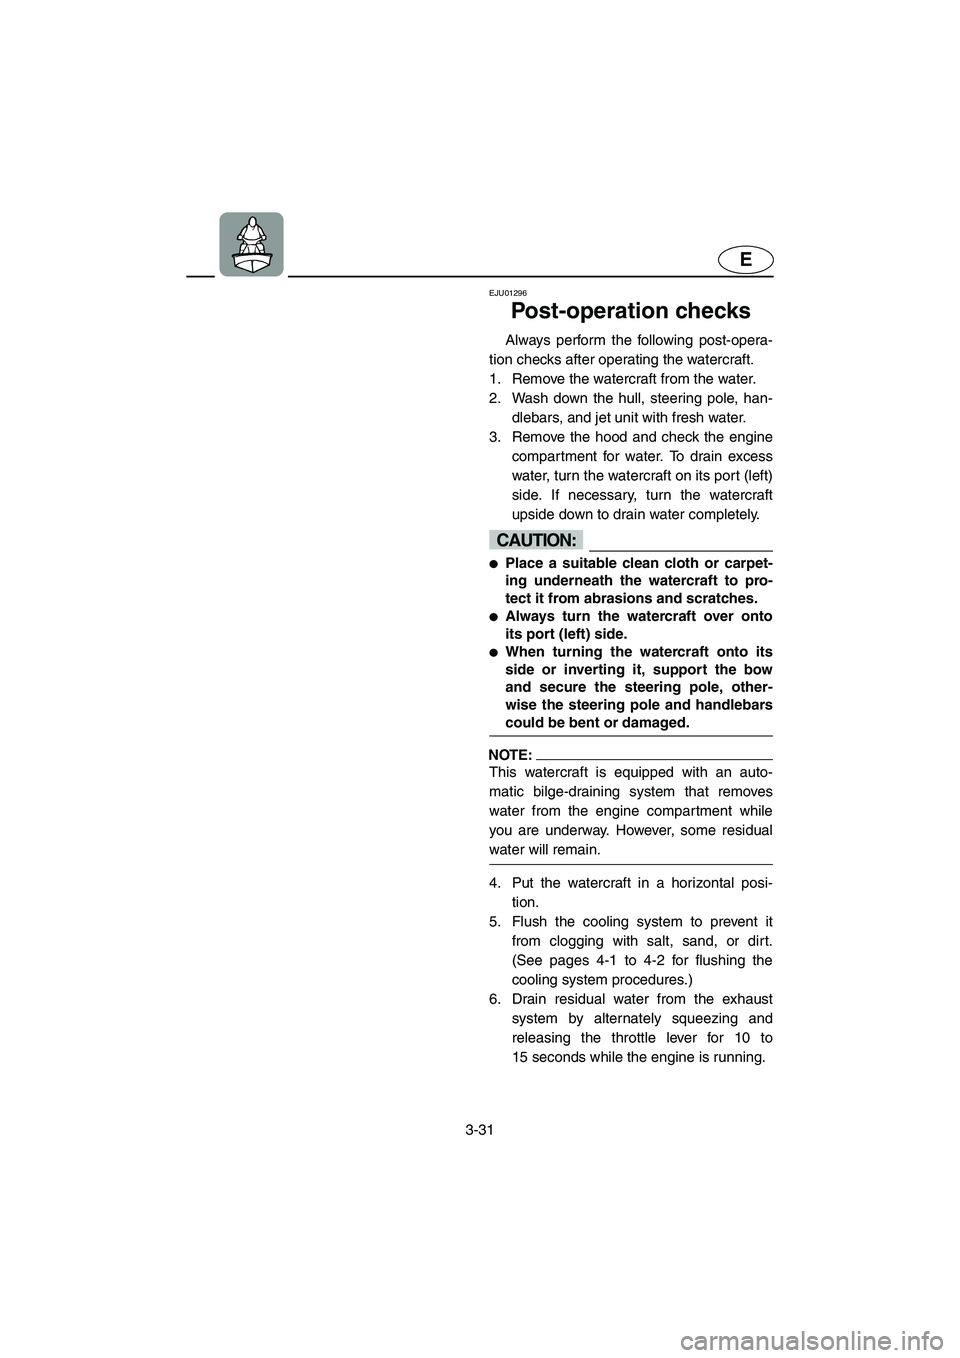 YAMAHA SUPERJET 2002  Owners Manual 3-31
E
EJU01296 
Post-operation checks  
Always perform the following post-opera-
tion checks after operating the watercraft. 
1. Remove the watercraft from the water. 
2. Wash down the hull, steering